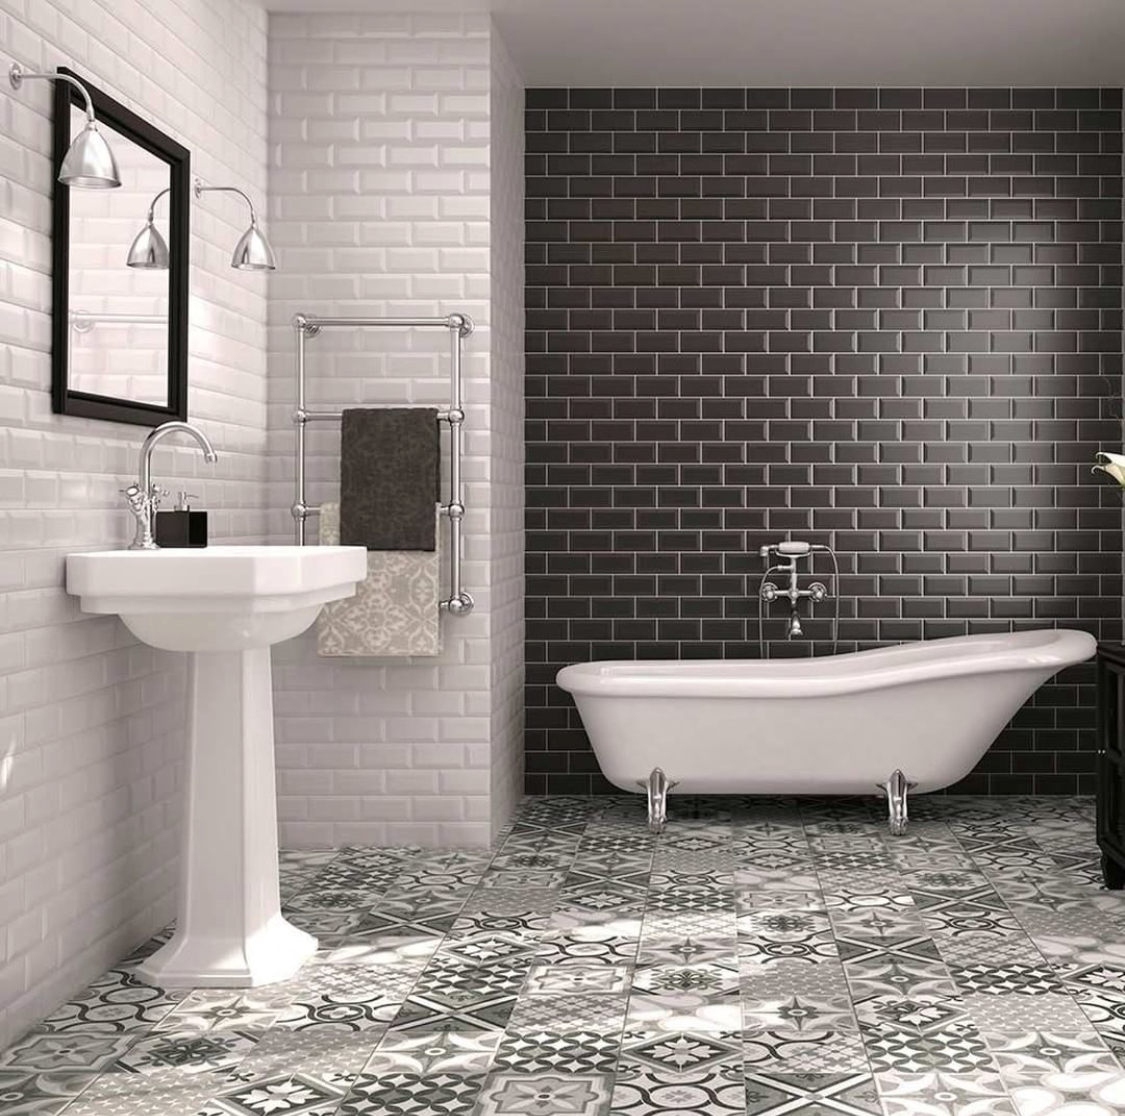 6 Bathroom Designs You’ll Want To Copy in 2022